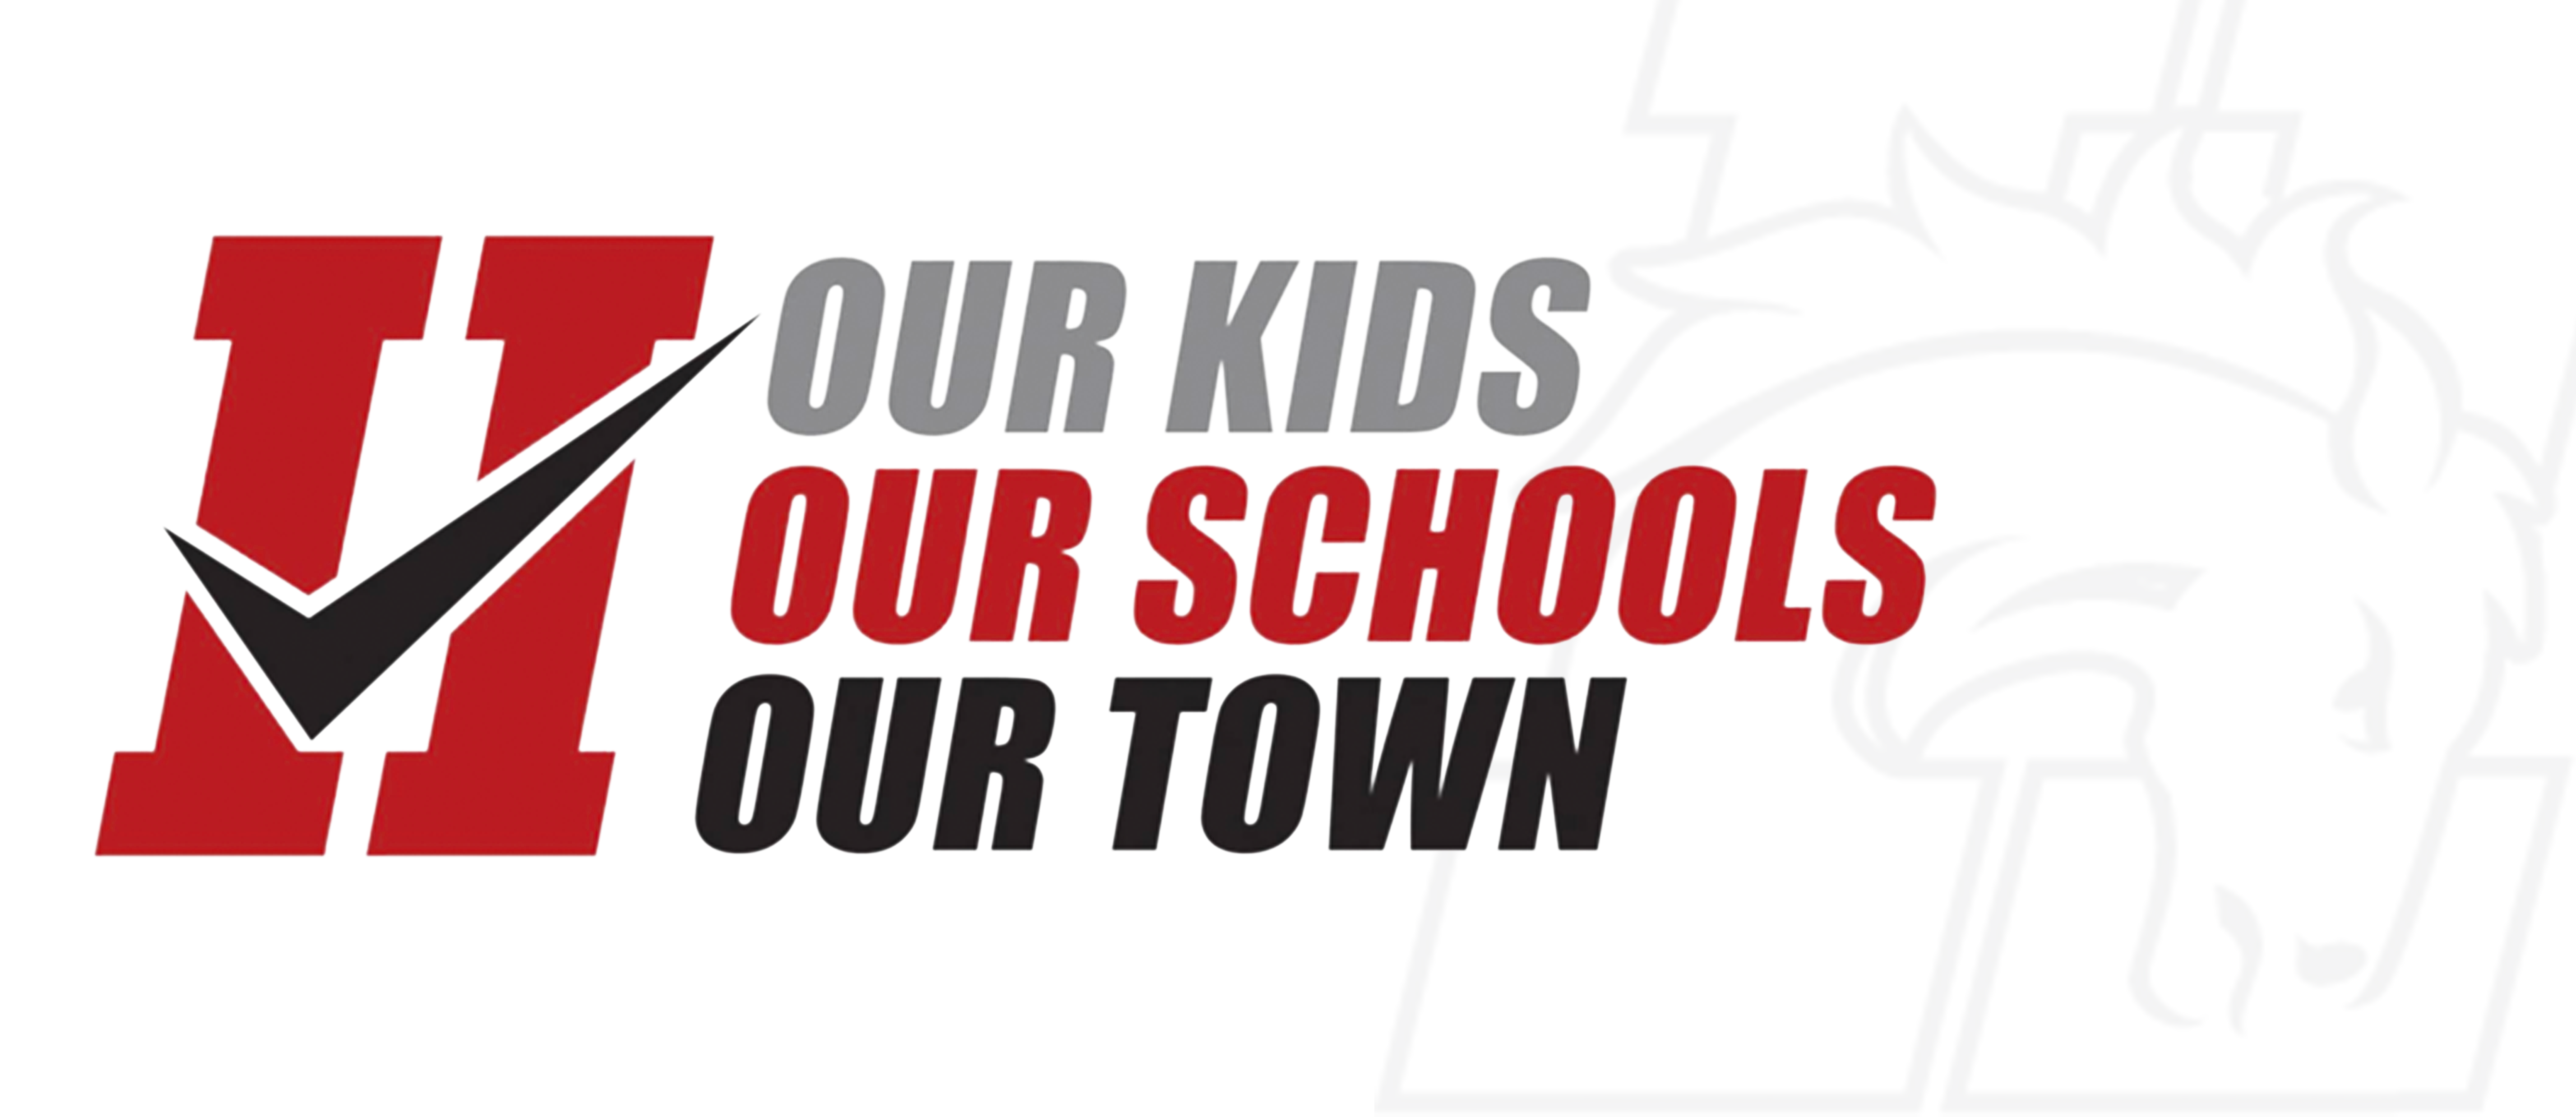 our kids, our schools our town